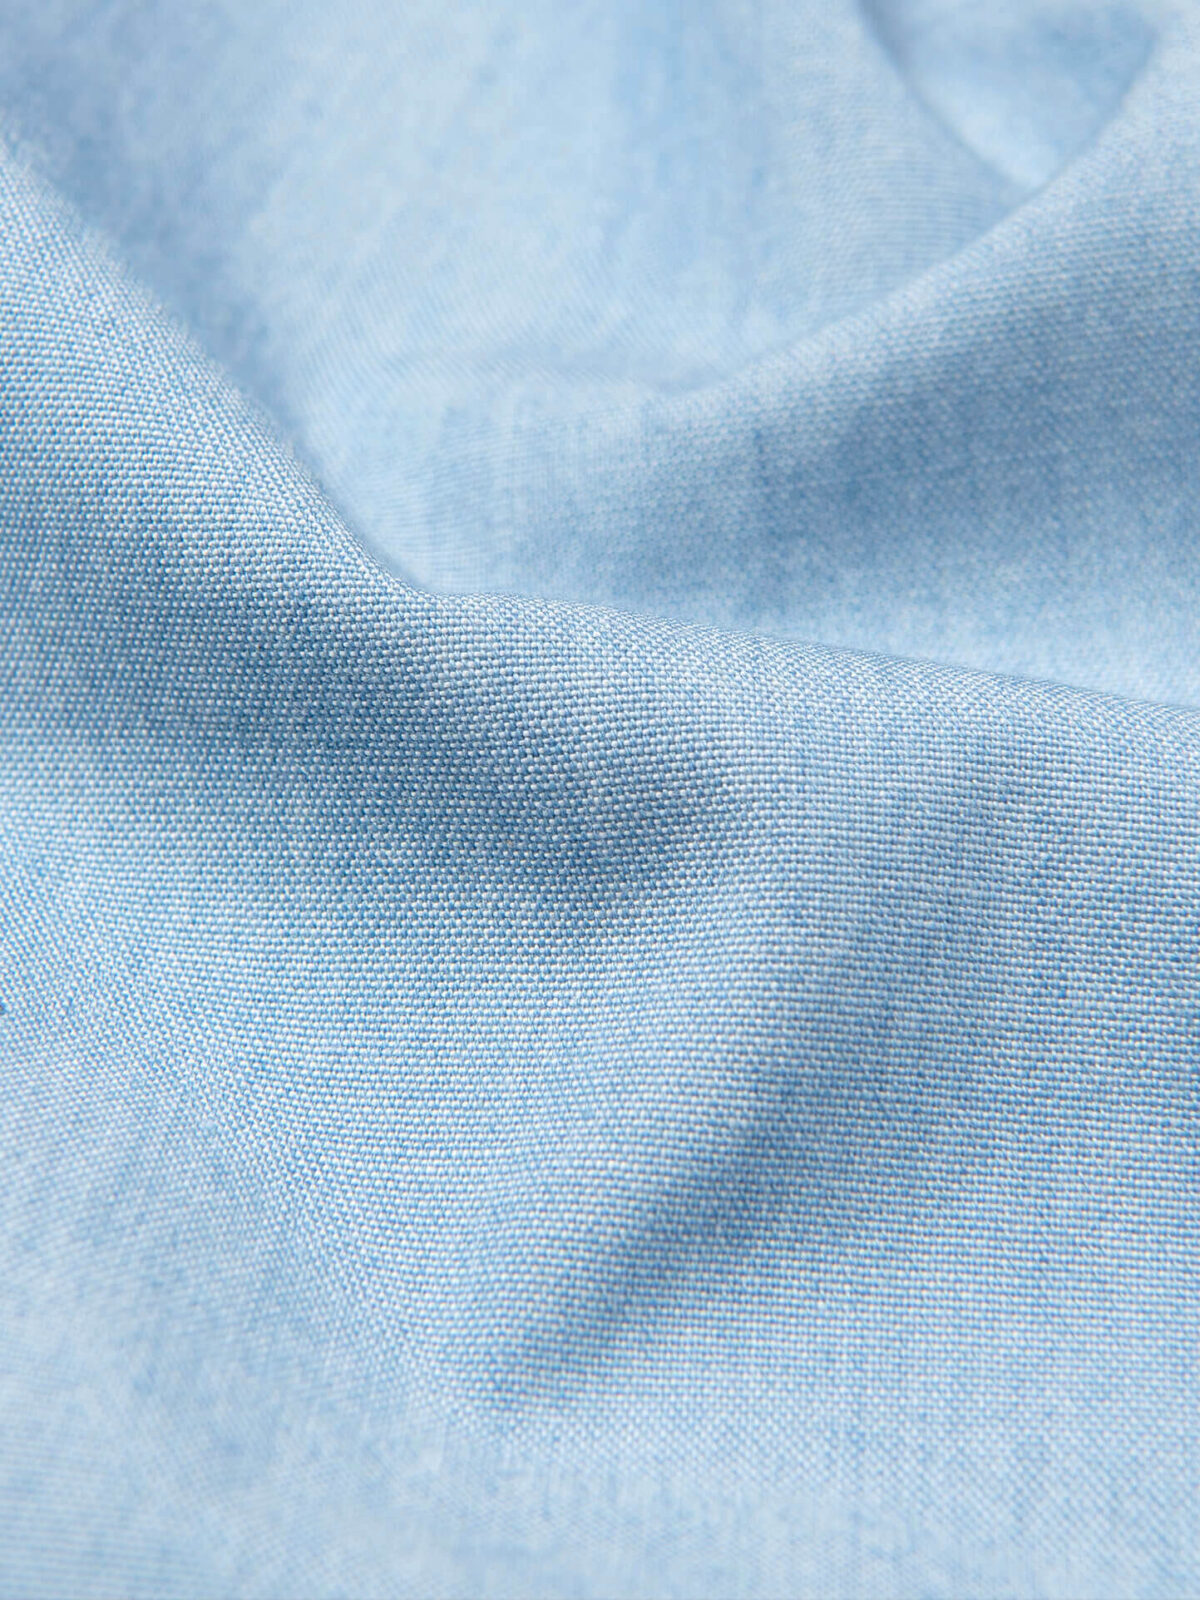 Jeans Background. Light Blue Denim Fabric Texture Stock Photo - Image of  country, apparel: 76327098